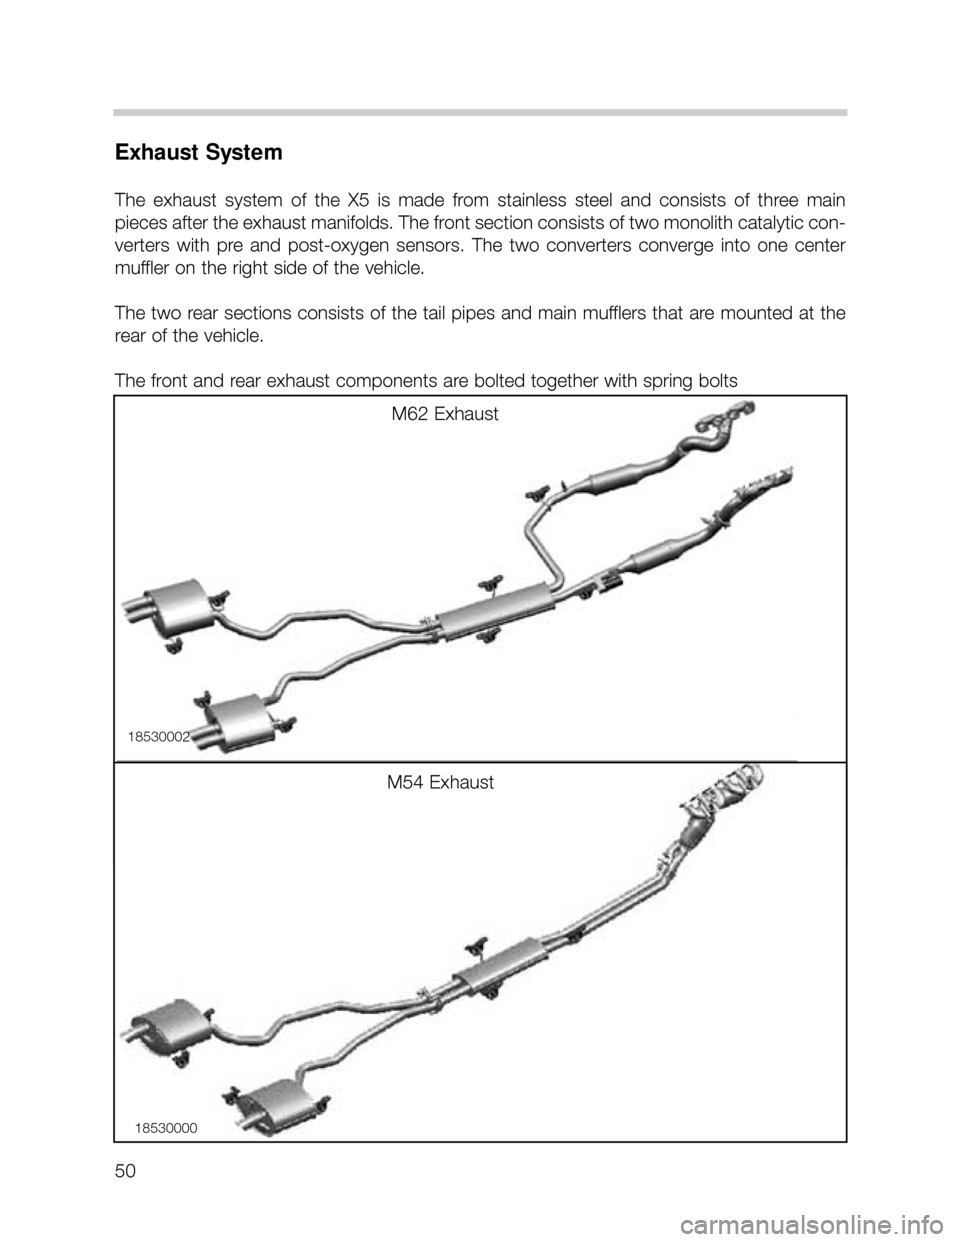 BMW X5 2001 E53 Service Manual 50
Exhaust System
The  exhaust  system  of  the  X5  is  made  from  stainless  steel  and  consists  of  three  main
pieces after the exhaust manifolds. The front section consists of two monolith cat